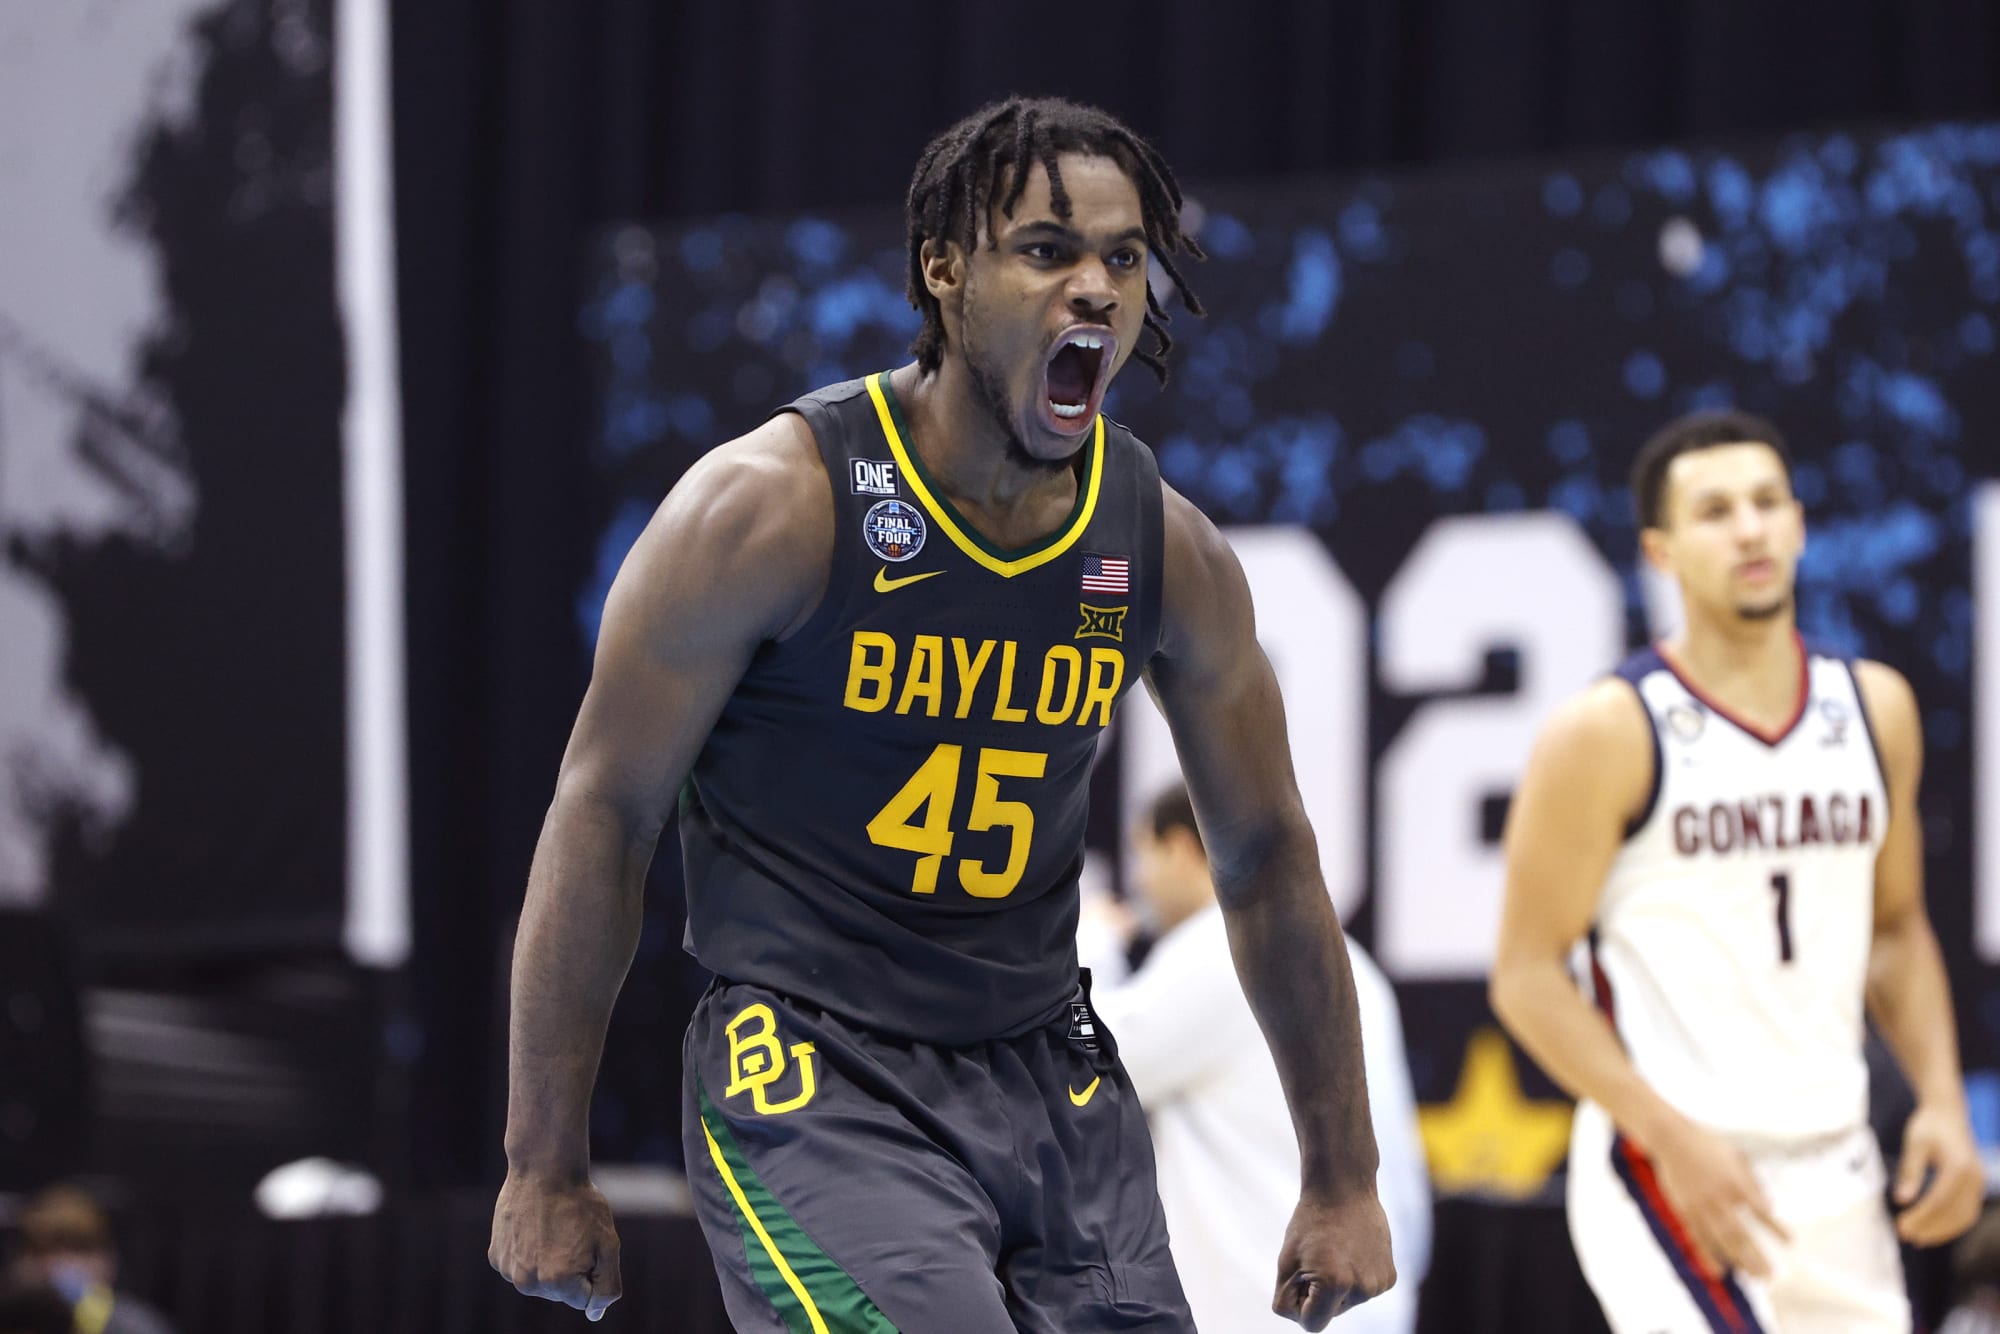 What Sacramento Kings fans should know about Baylor's Davion Mitchell